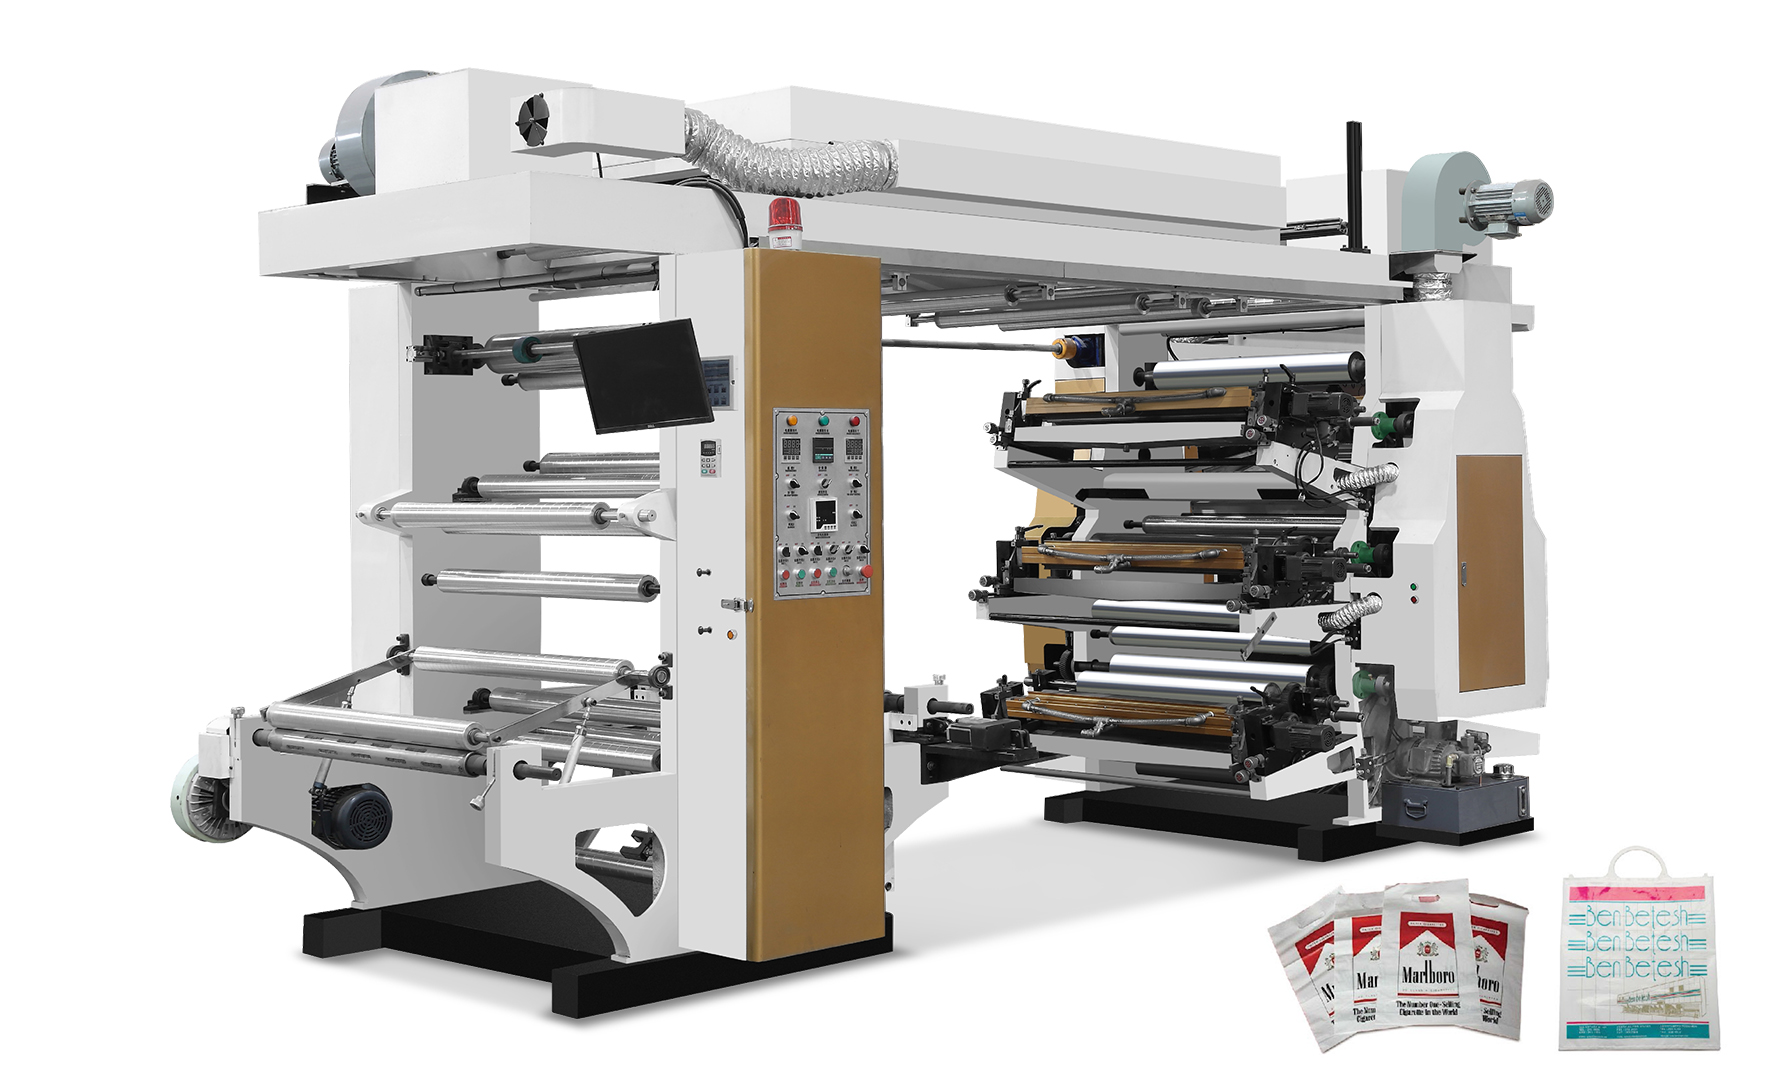 Fixed Competitive Price China Multicolors Stack Type Flexography Printing Machine Flexographic Printing Press Flexo Printing Machine UV Label Printing Press neDelam/Relam uye Die Cutting.